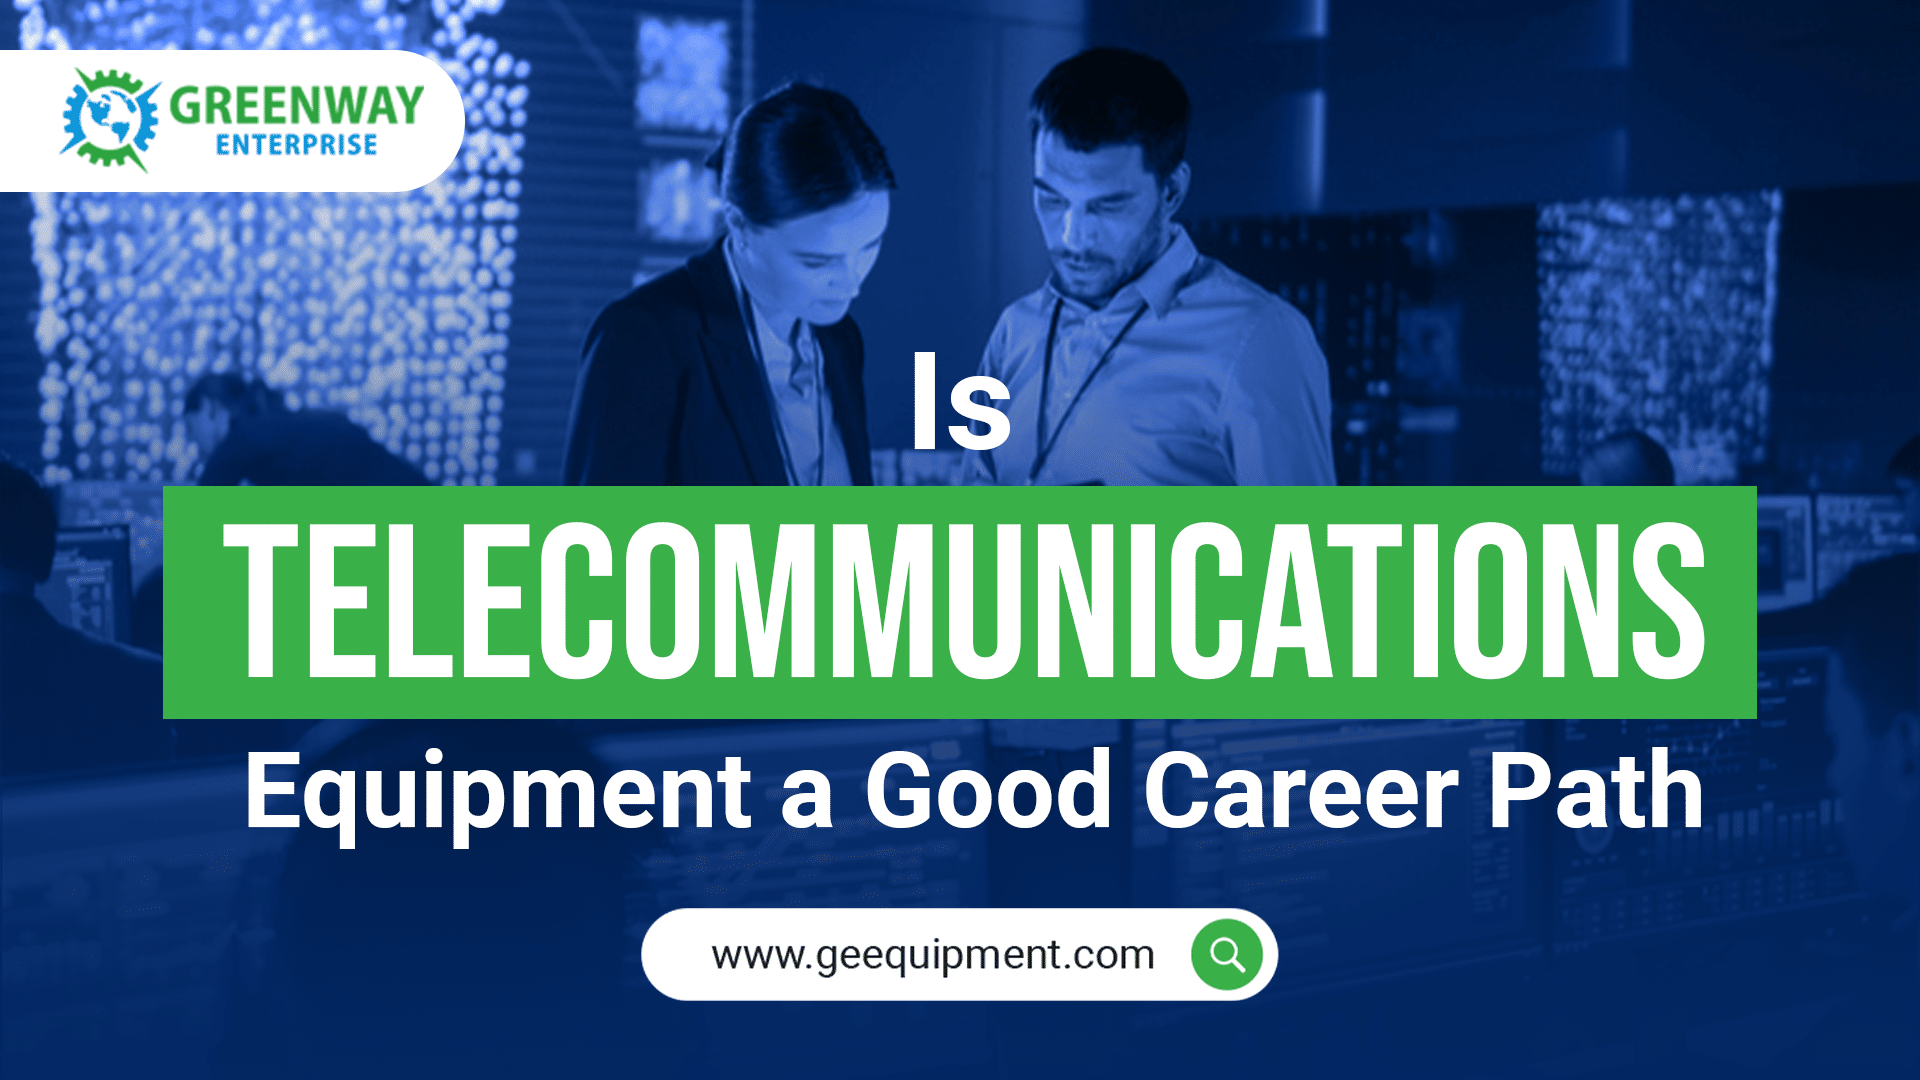 Is Telecommunications Equipment a Good Career Path?